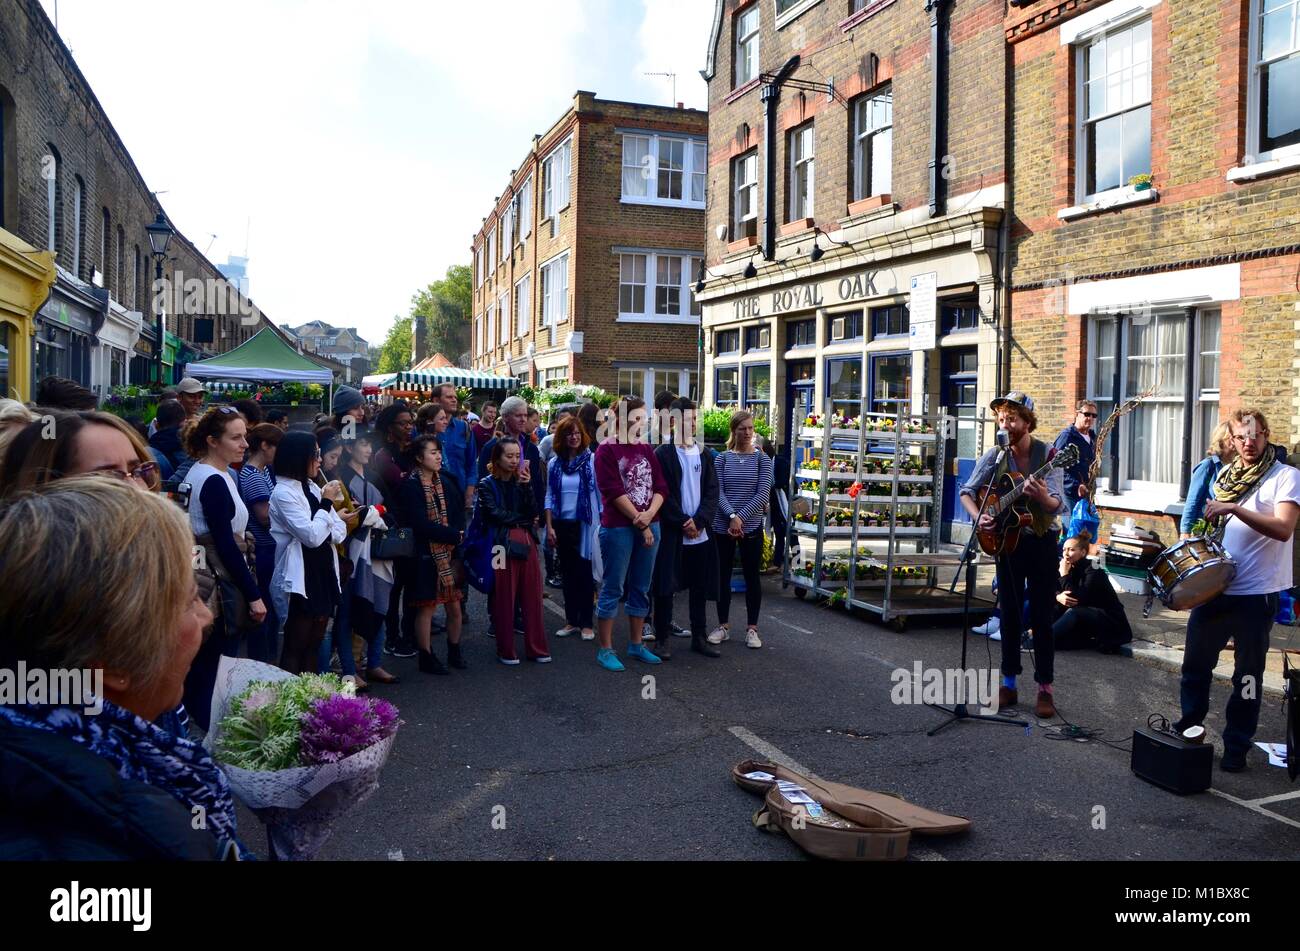 a band of musicians playing in columbia road flower market east london UK on a sunny sunday 2017 Stock Photo